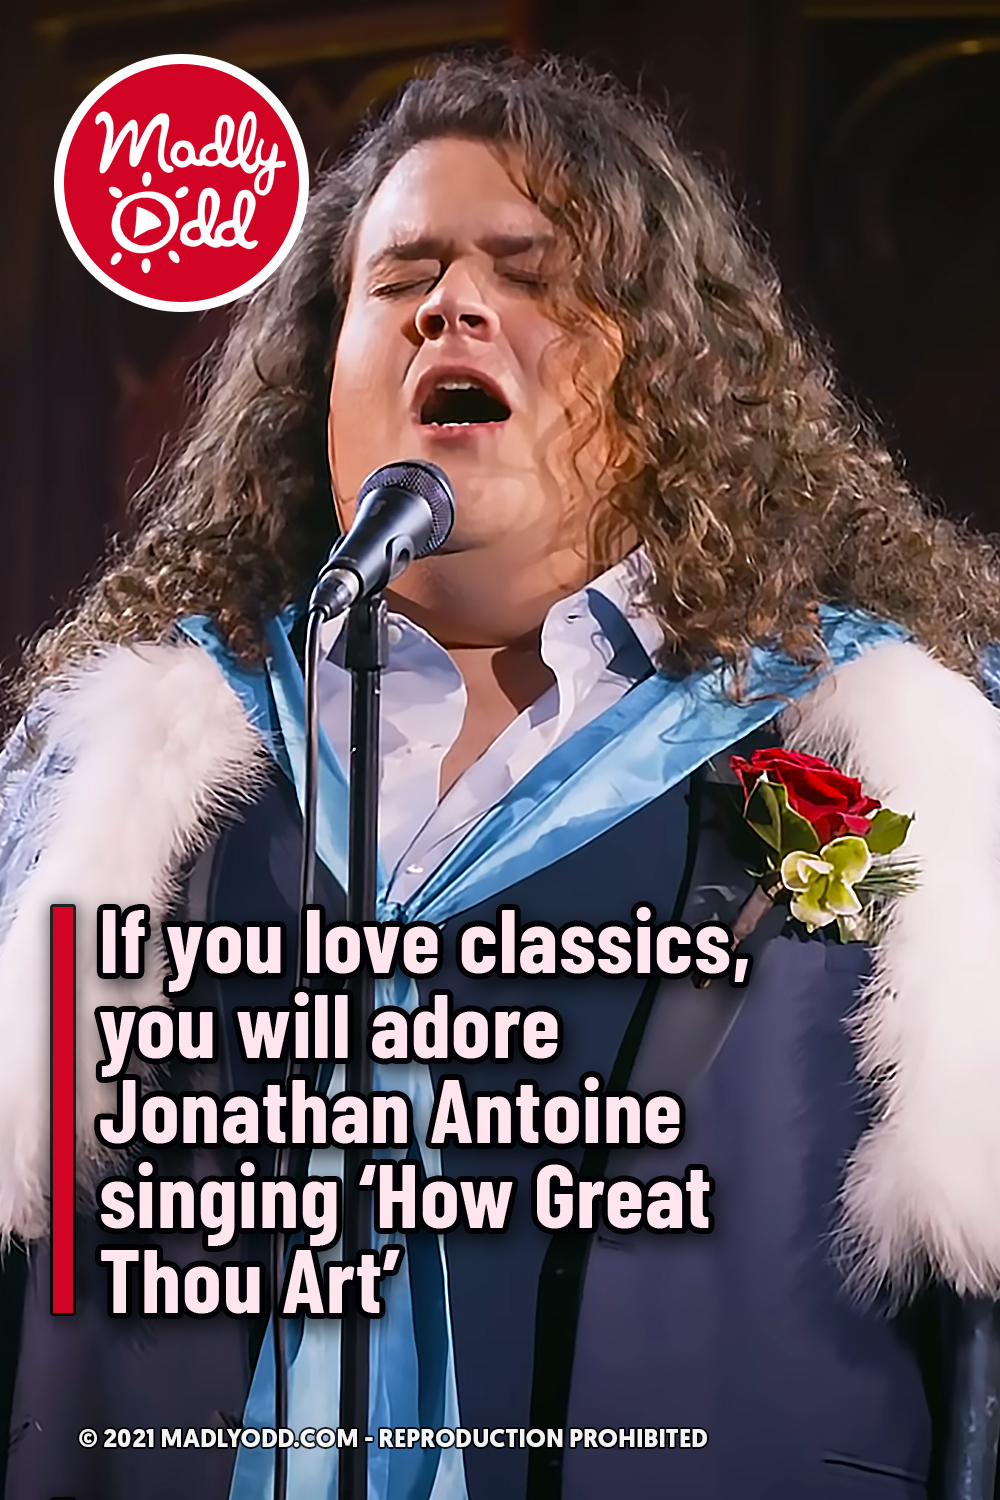 If you love classics, you will adore Jonathan Antoine singing ‘How Great Thou Art’